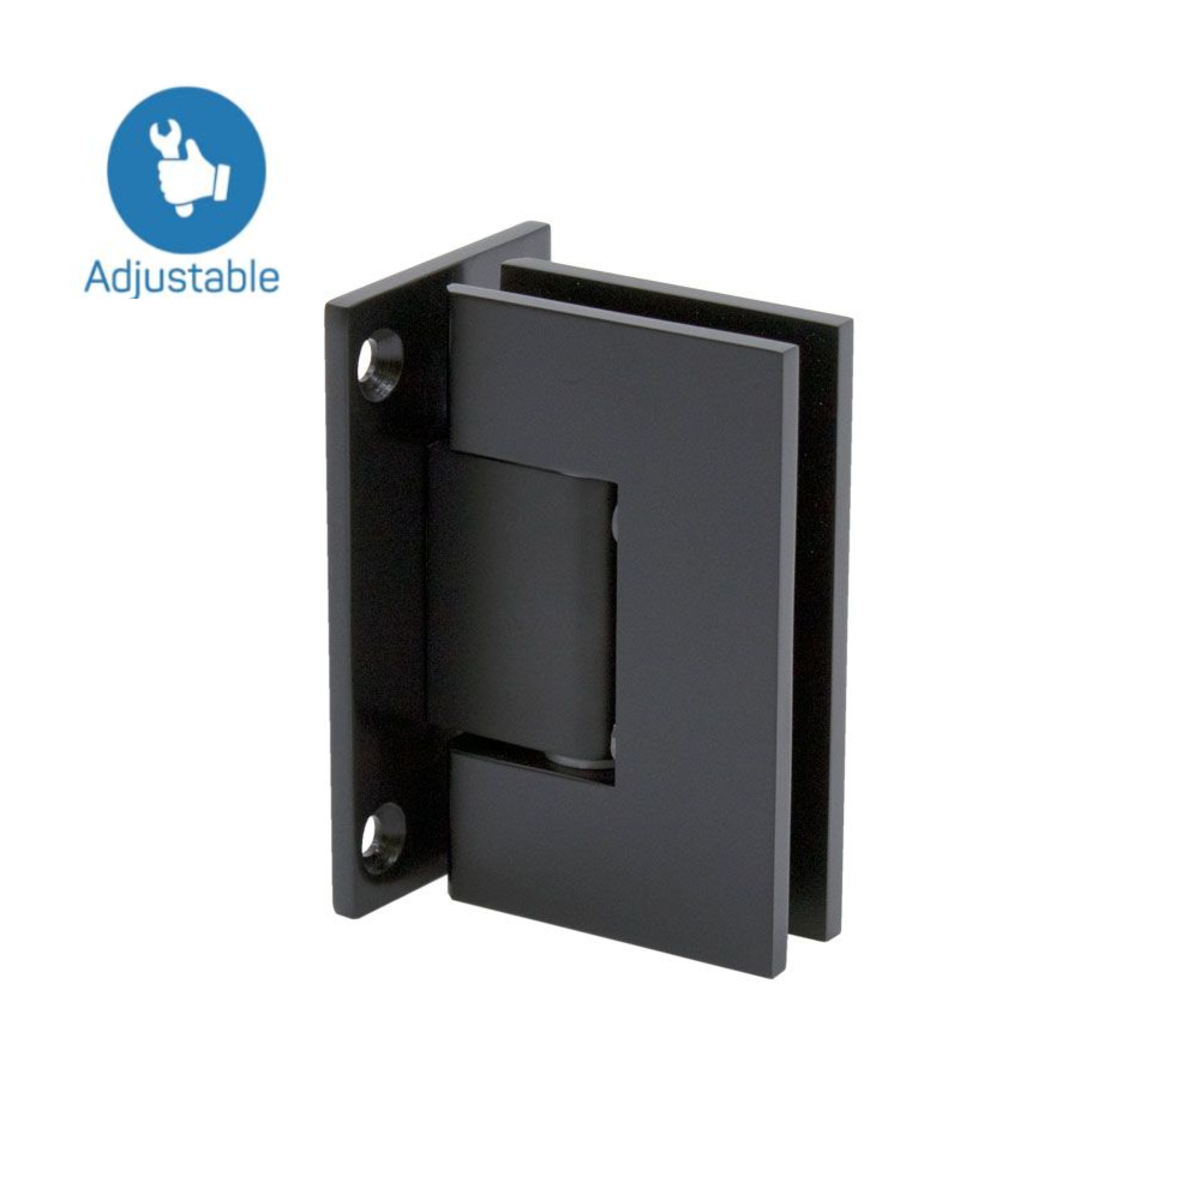 Heavy Duty Wall to Glass Full Back Plate Adjustable Hinge